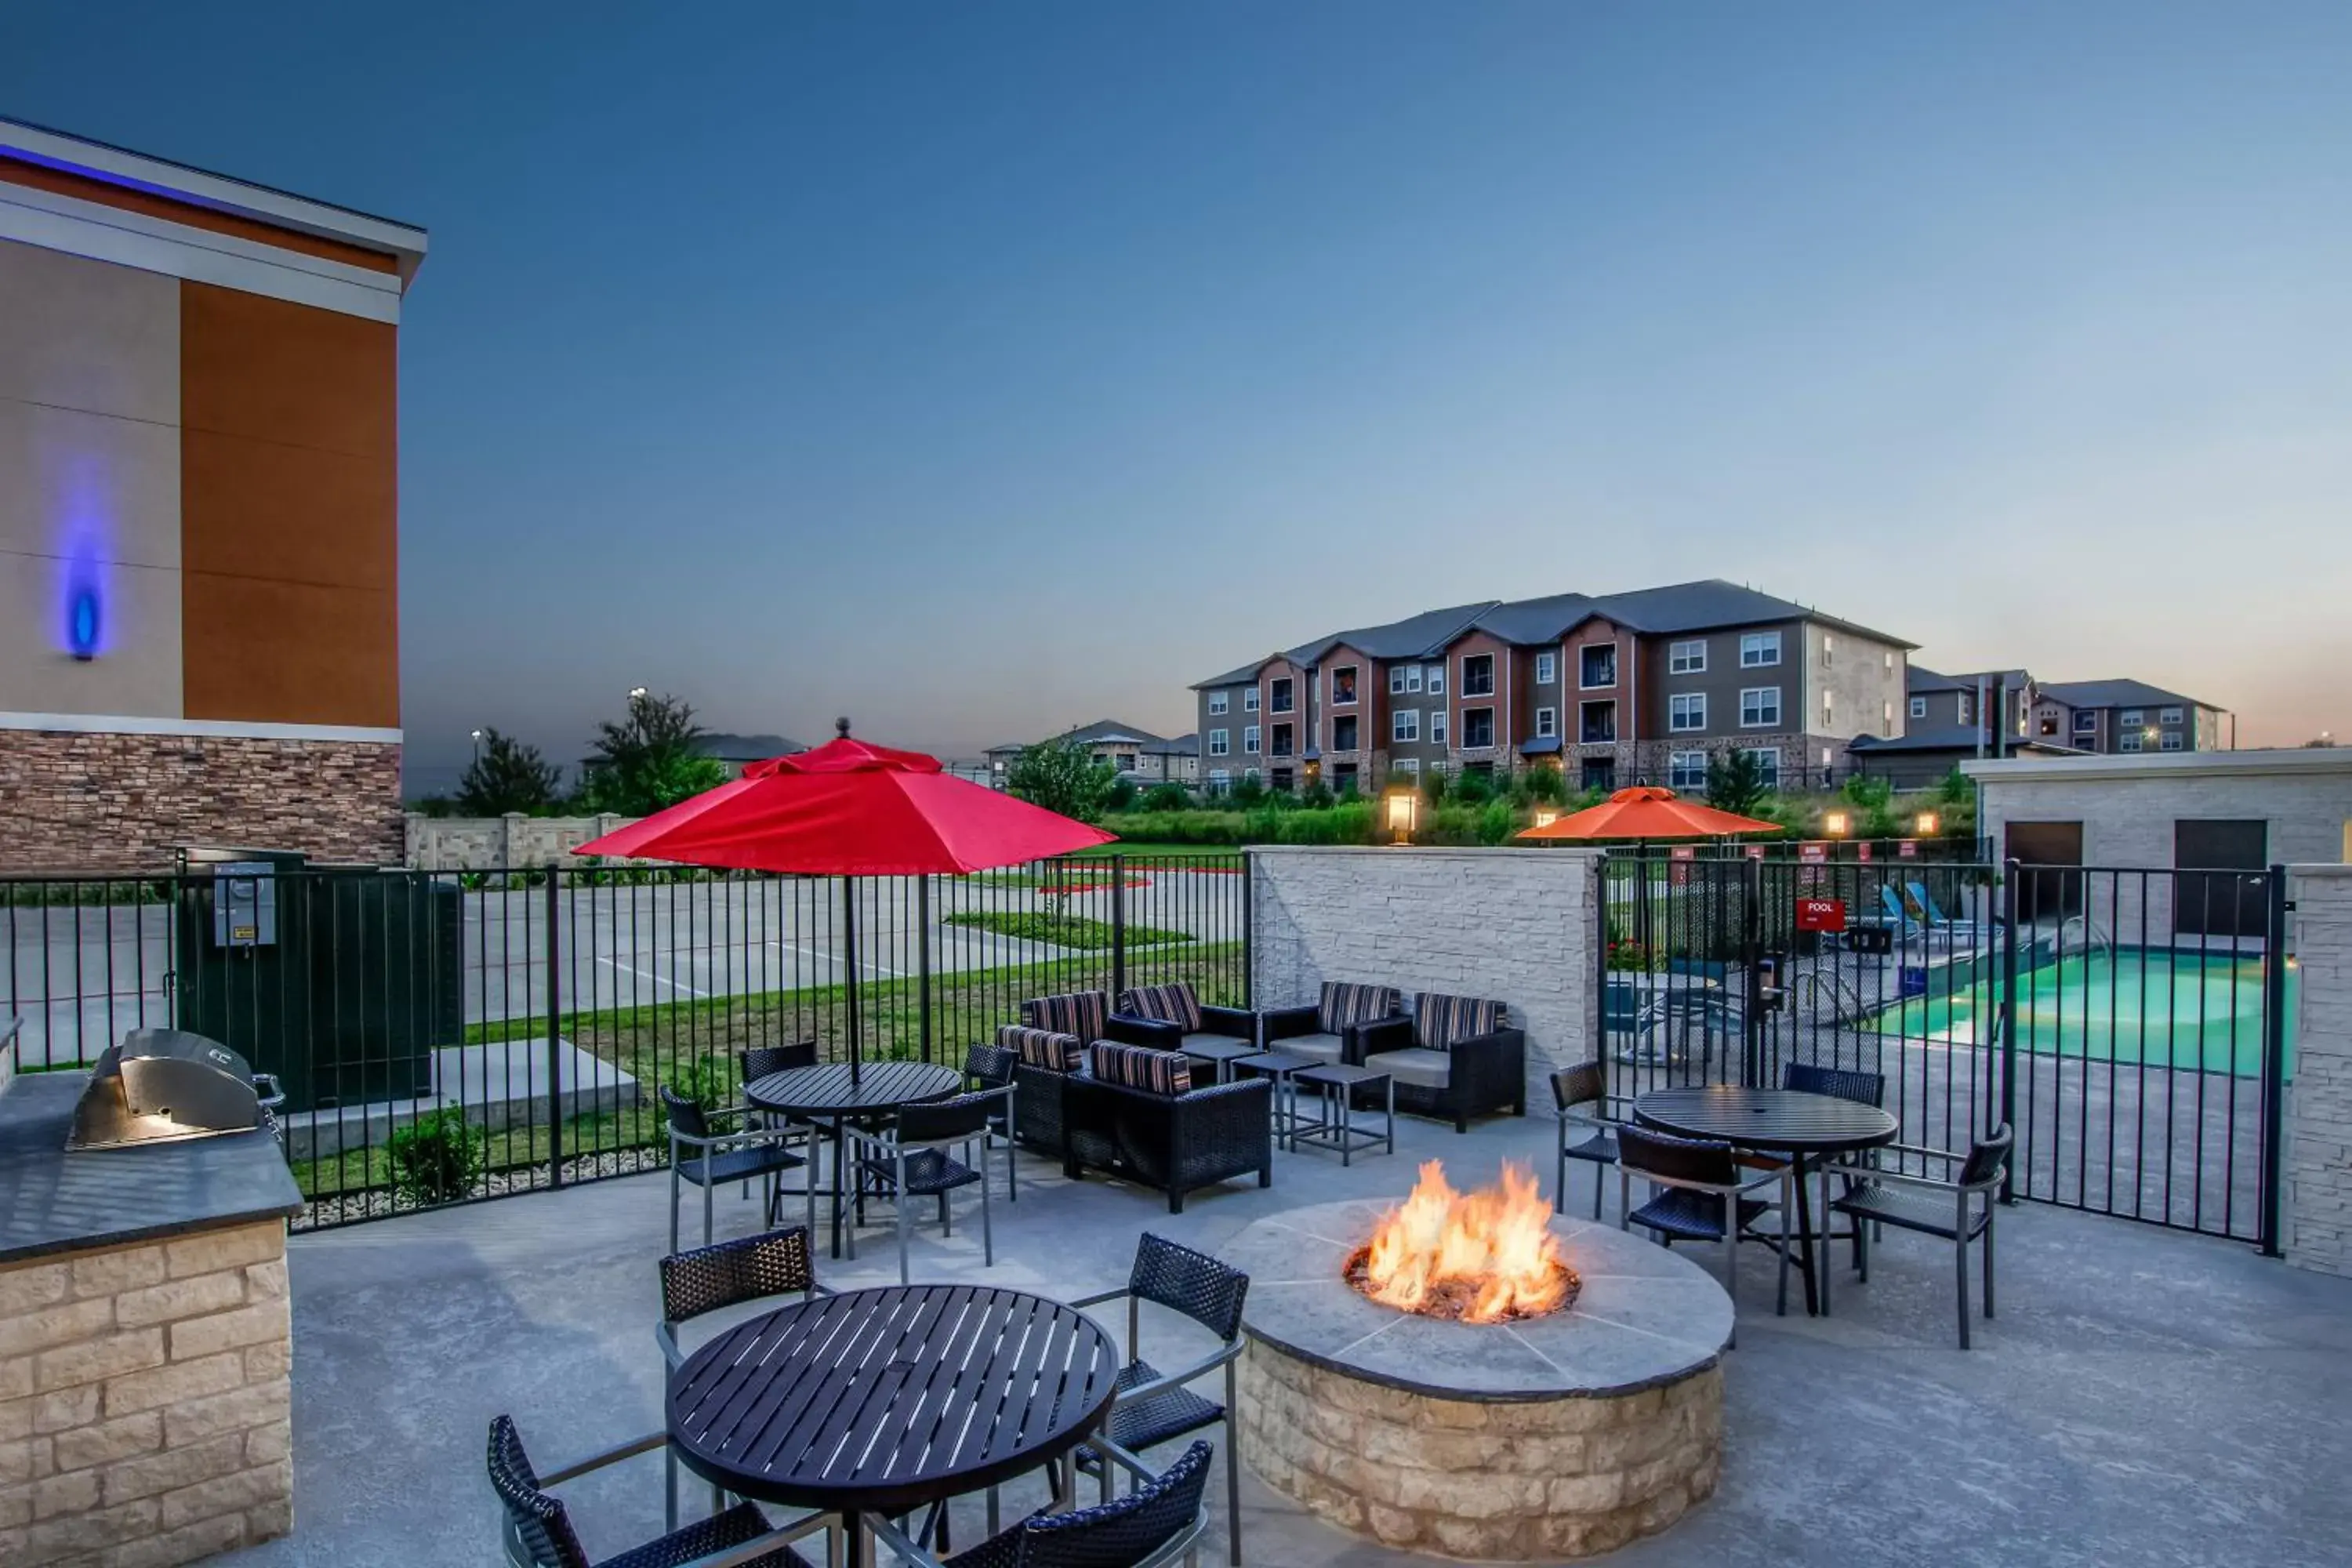 Property building in TownePlace Suites by Marriott Waco South